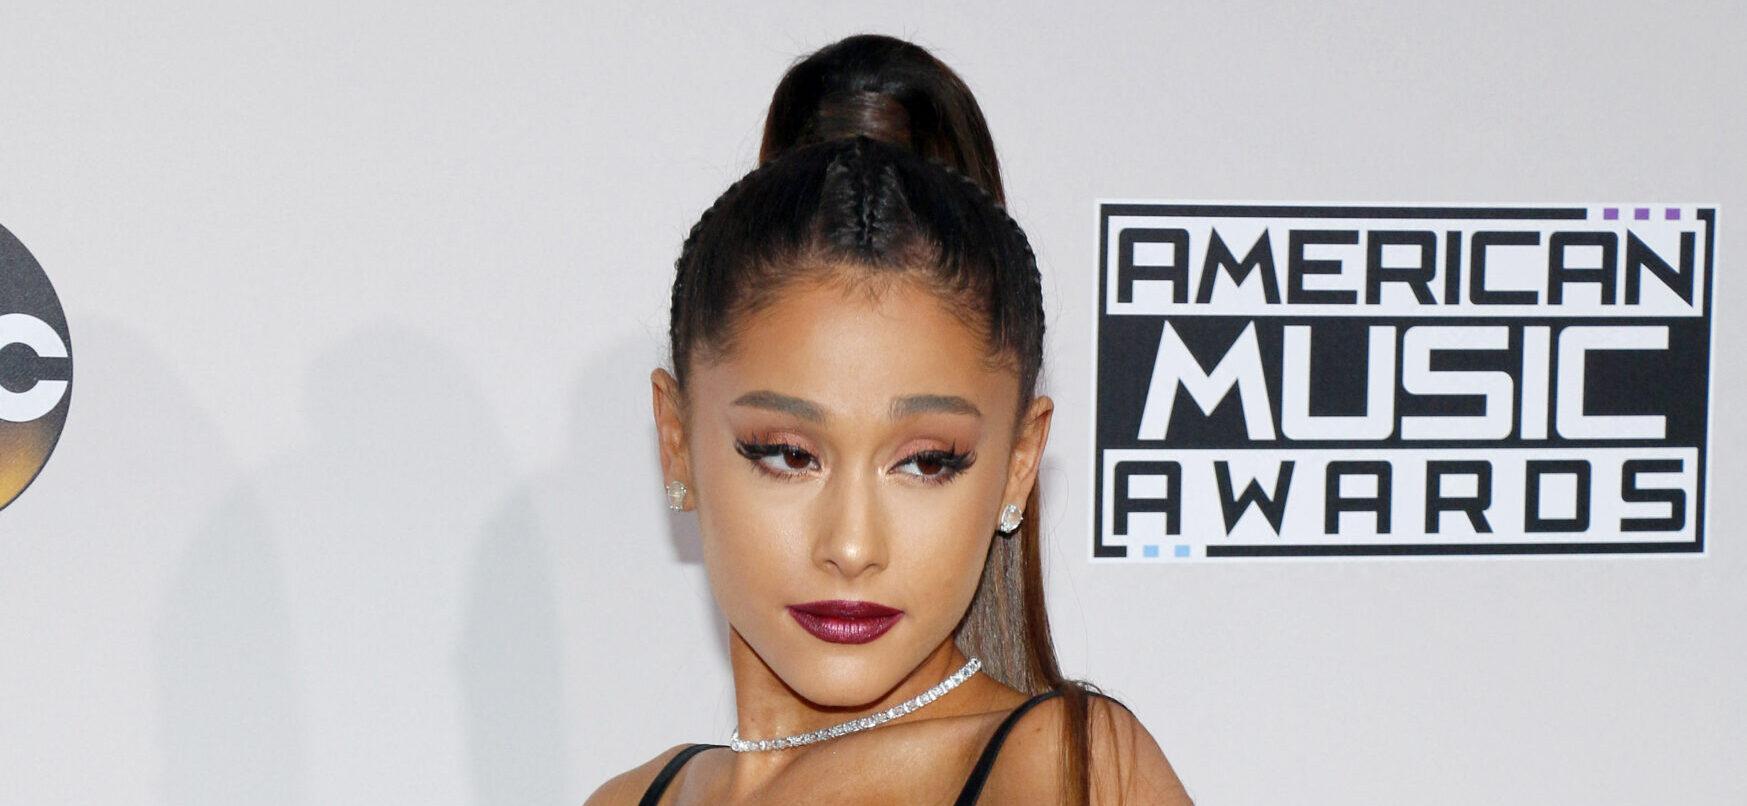 Ariana Grande’s Song ‘The Boy Is Mine’ Allegedly A Dig At Her Boyfriend’s Estranged Wife